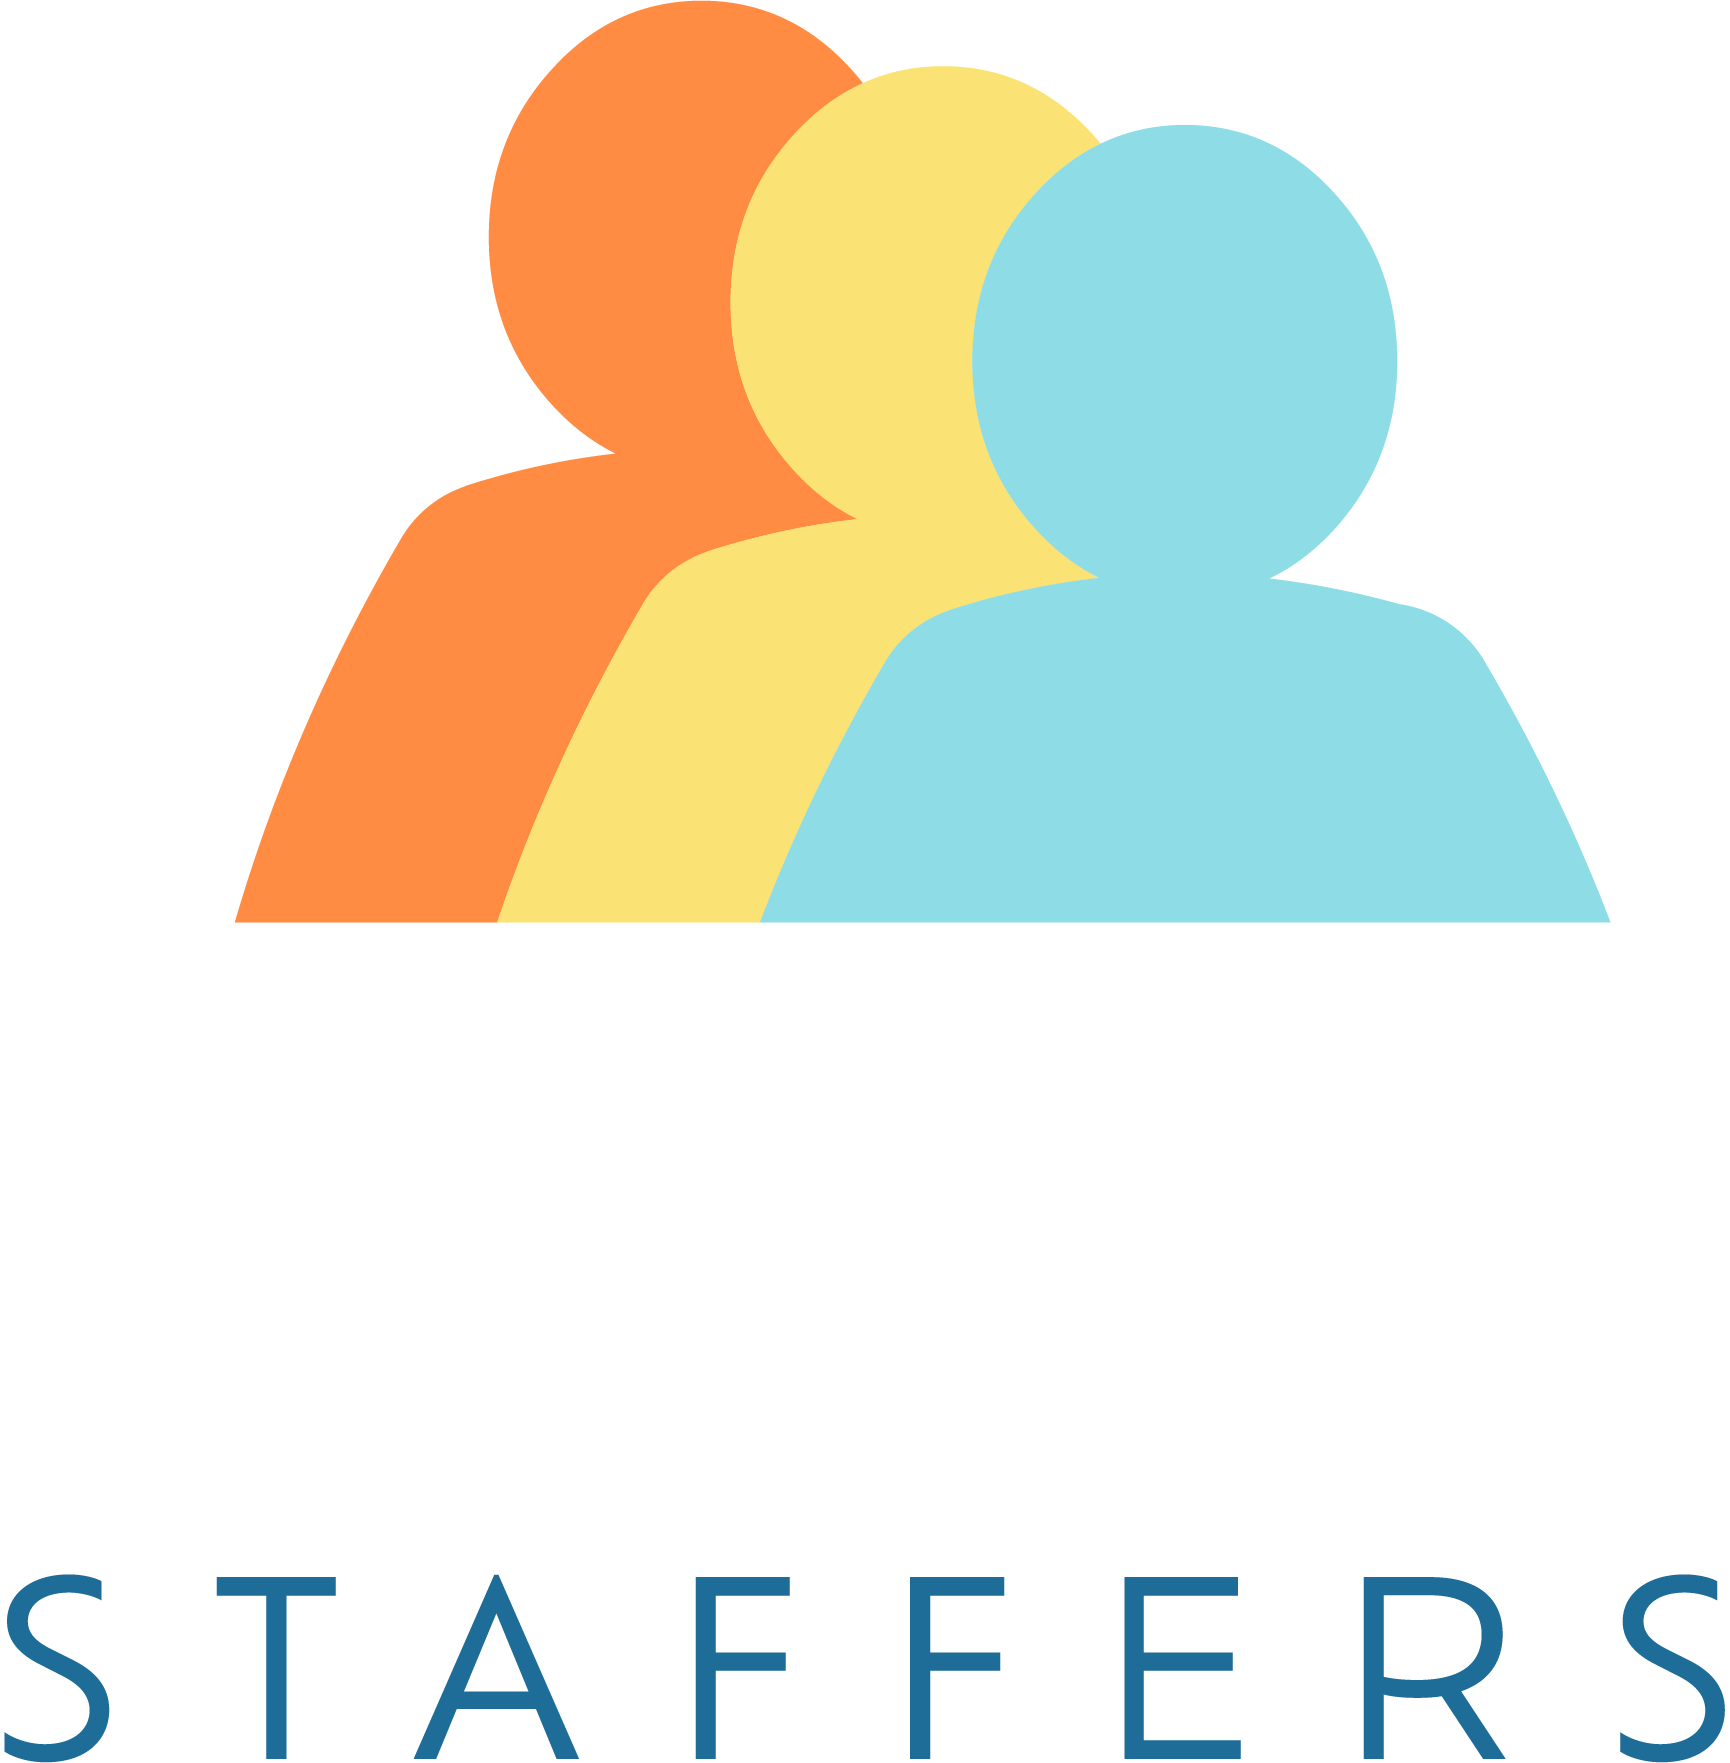 acmStaffers - logo - stacked - whiteACM - noTag